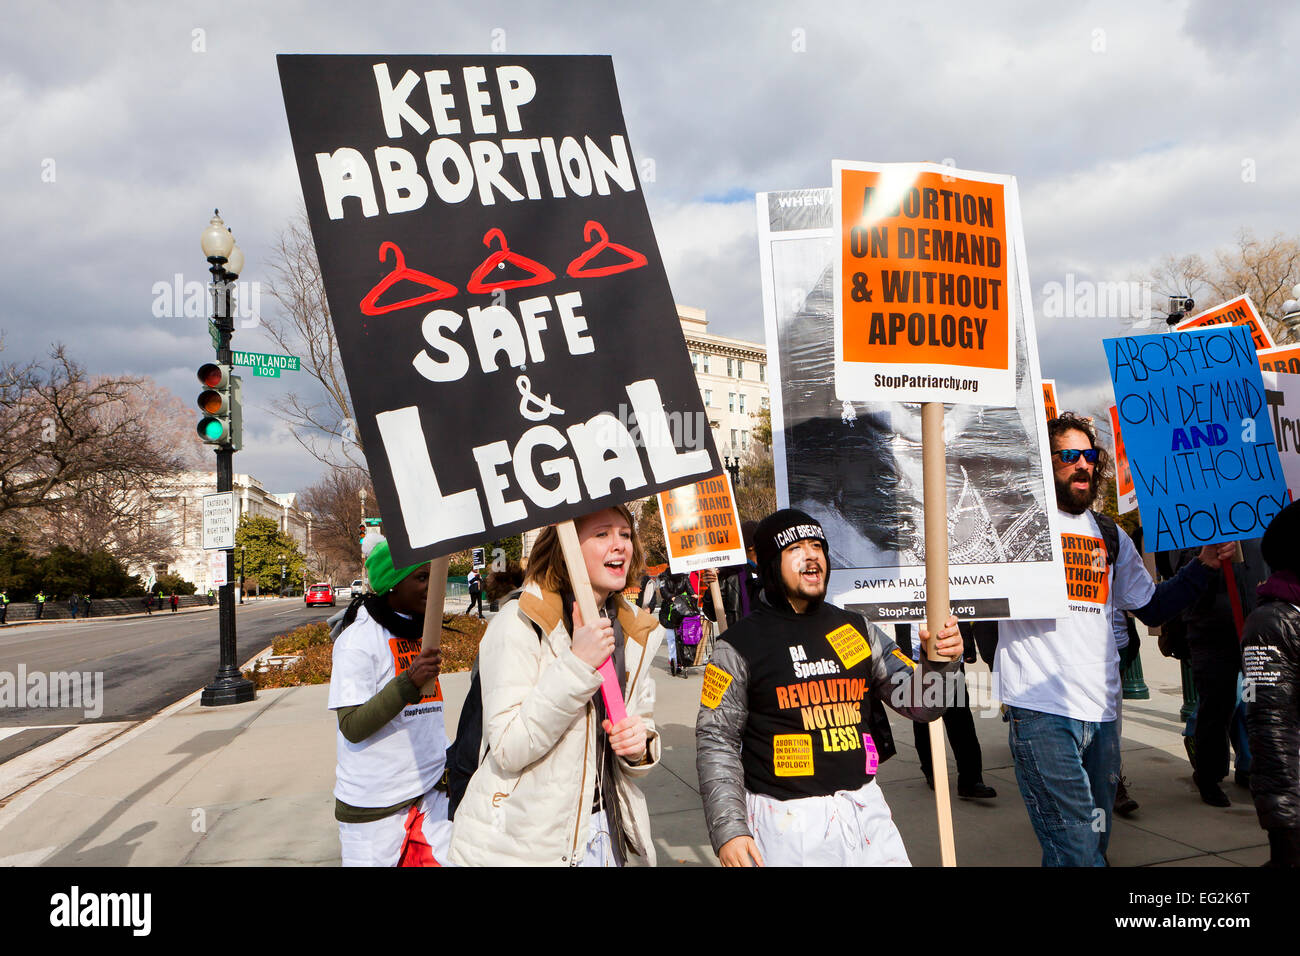 Pro-Choice activists protesting in front of the US Supreme Court - January 22, 2015, Washington, DC USA Stock Photo